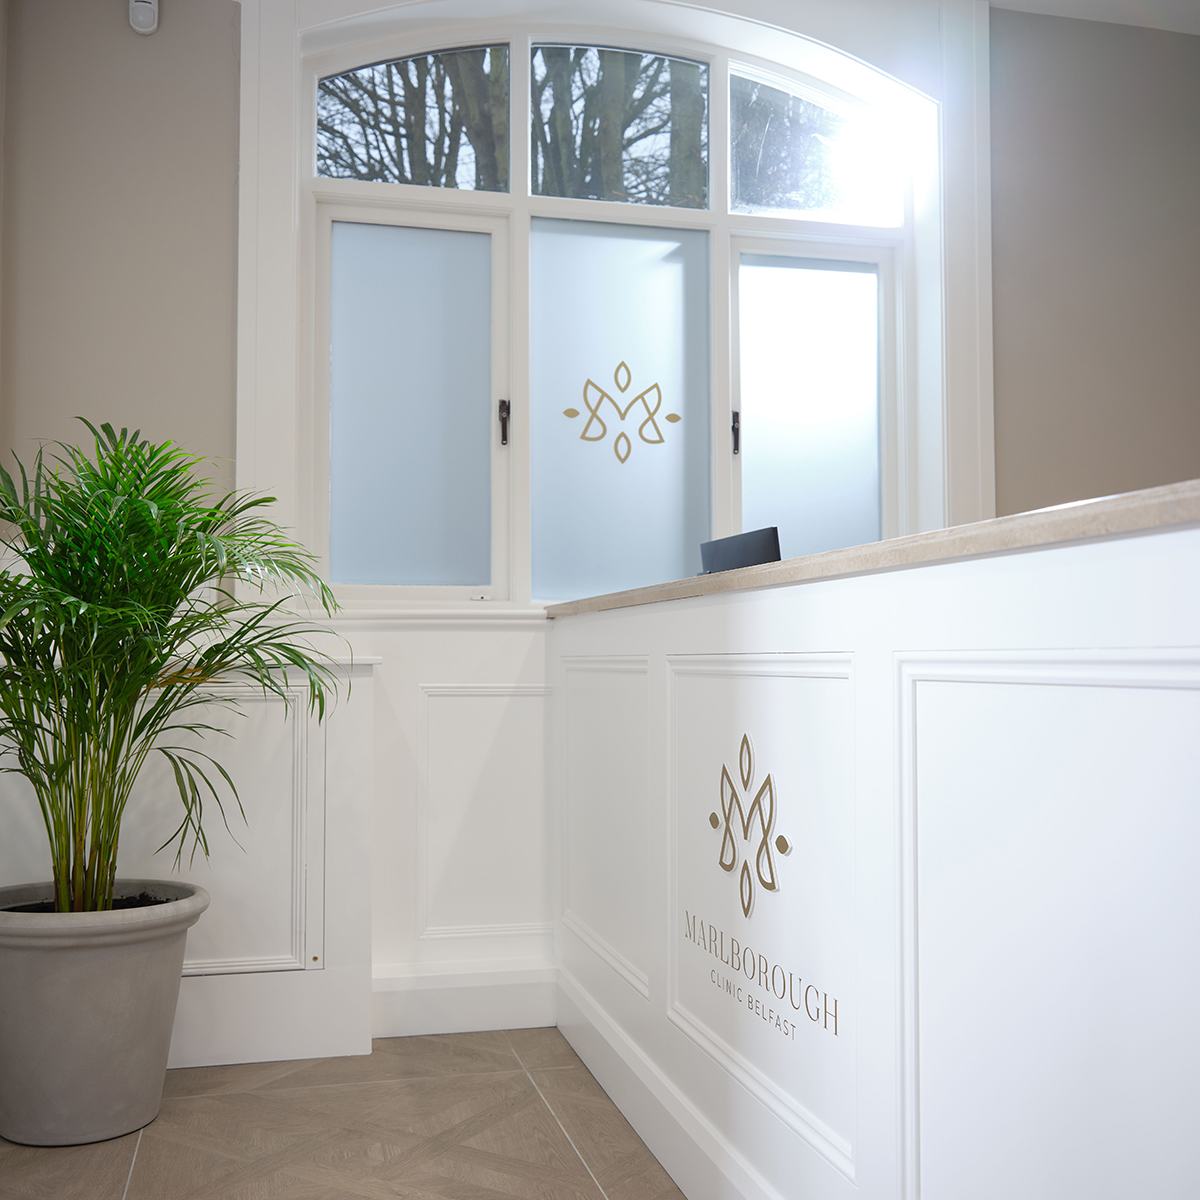 Gold Marlborough Clinic Belfast logo on white reception desk and frosted window